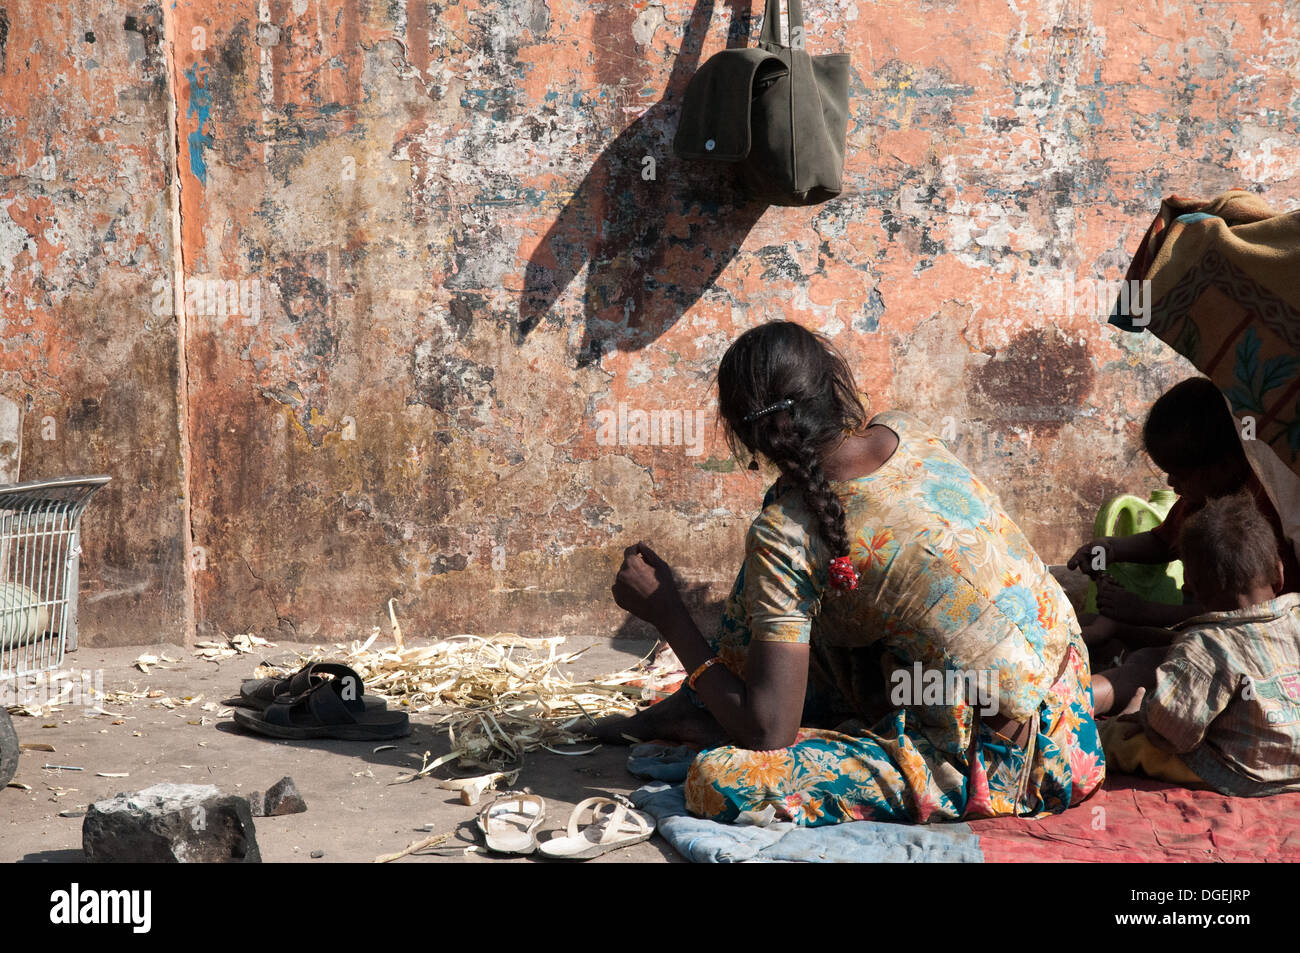 A poor Indian mother living on the streets of Jaipur with her children. Stock Photo